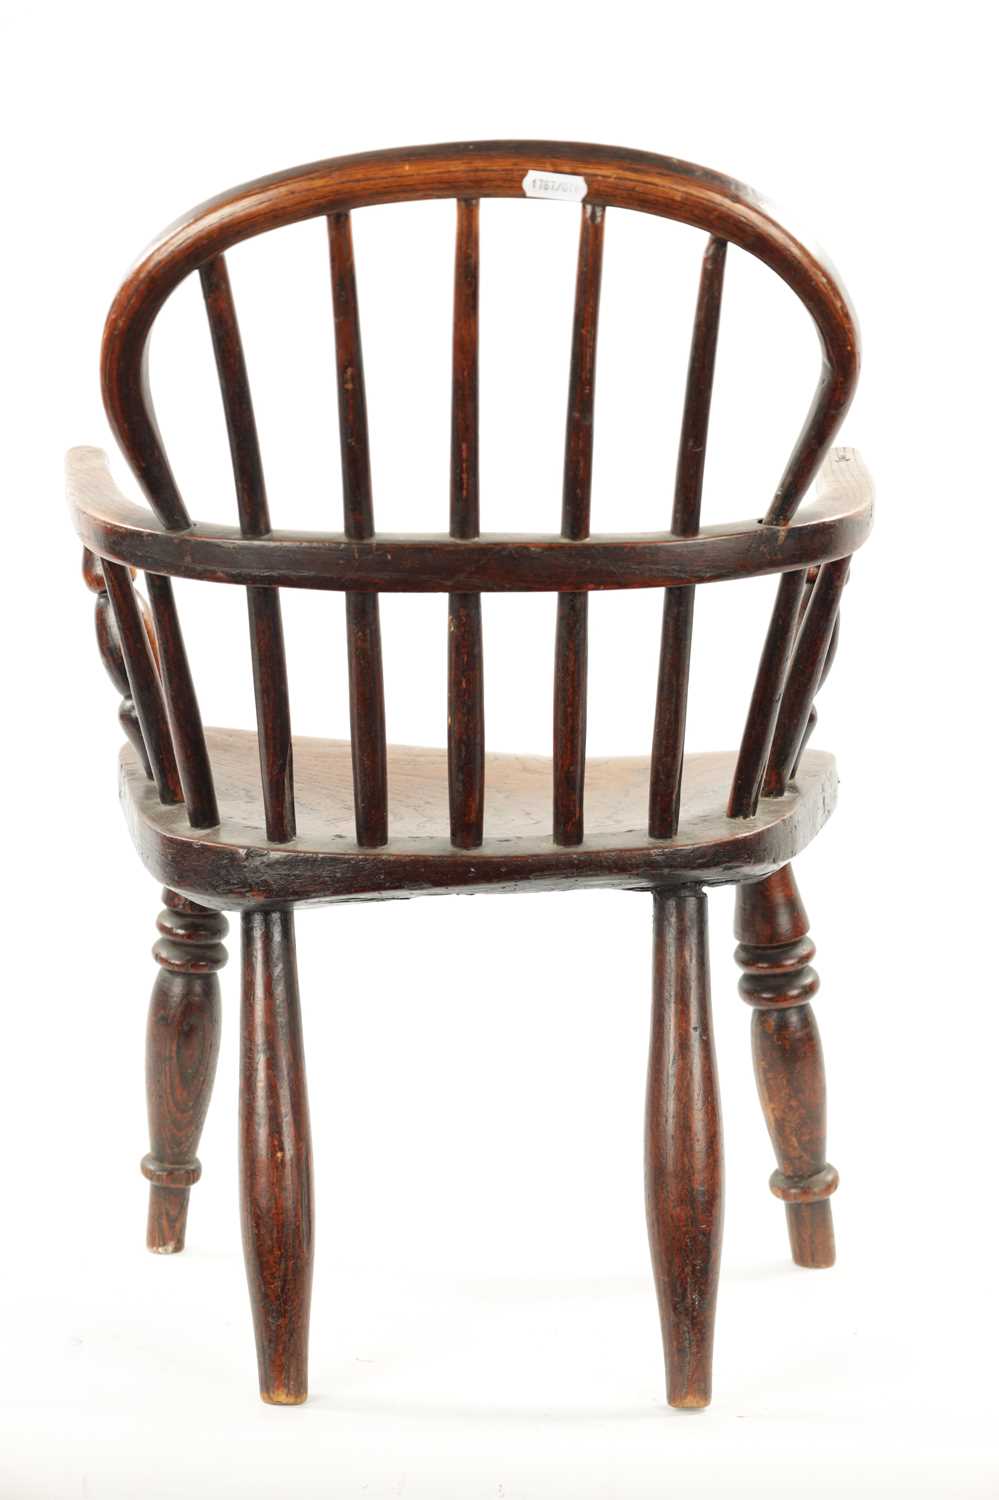 AN 18TH CENTURY ASH AND ELM CHILDS WINDSOR CHAIR - Image 8 of 9